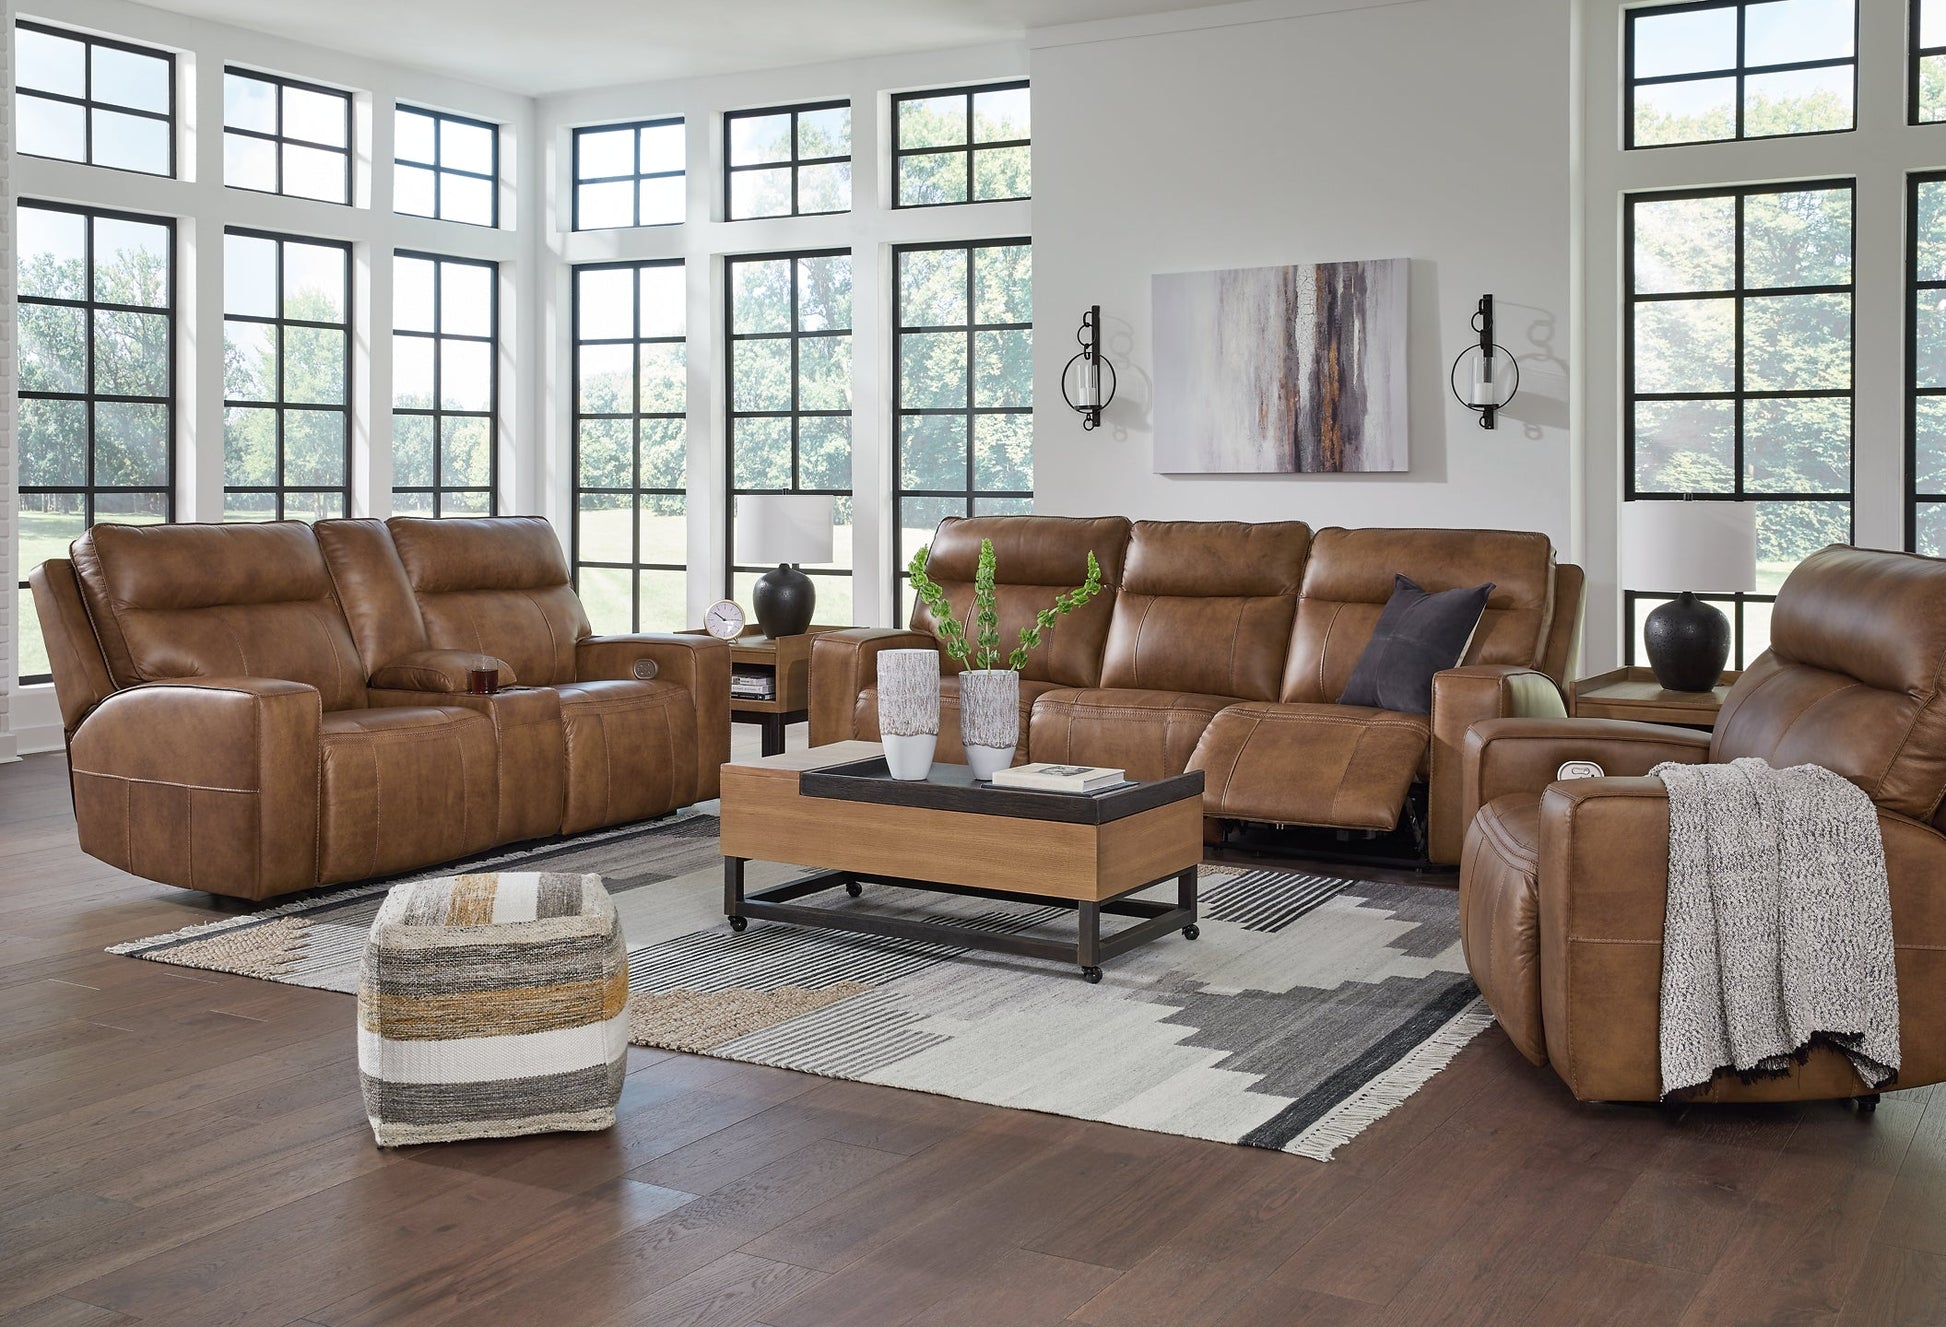 Game Plan Sofa, Loveseat and Recliner at Walker Mattress and Furniture Locations in Cedar Park and Belton TX.